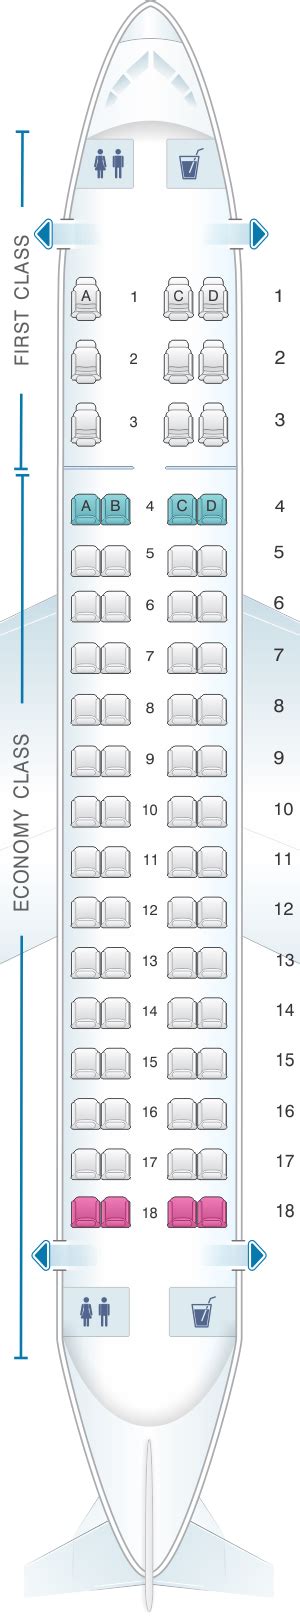 Streaming video. power. Power outlets. usb. USB charging. local_pizza. Food & Snacks. Seat 2D is a standard first class window seat with 36" of seat pitch, which is average across Embraer 170's worldwide.. 